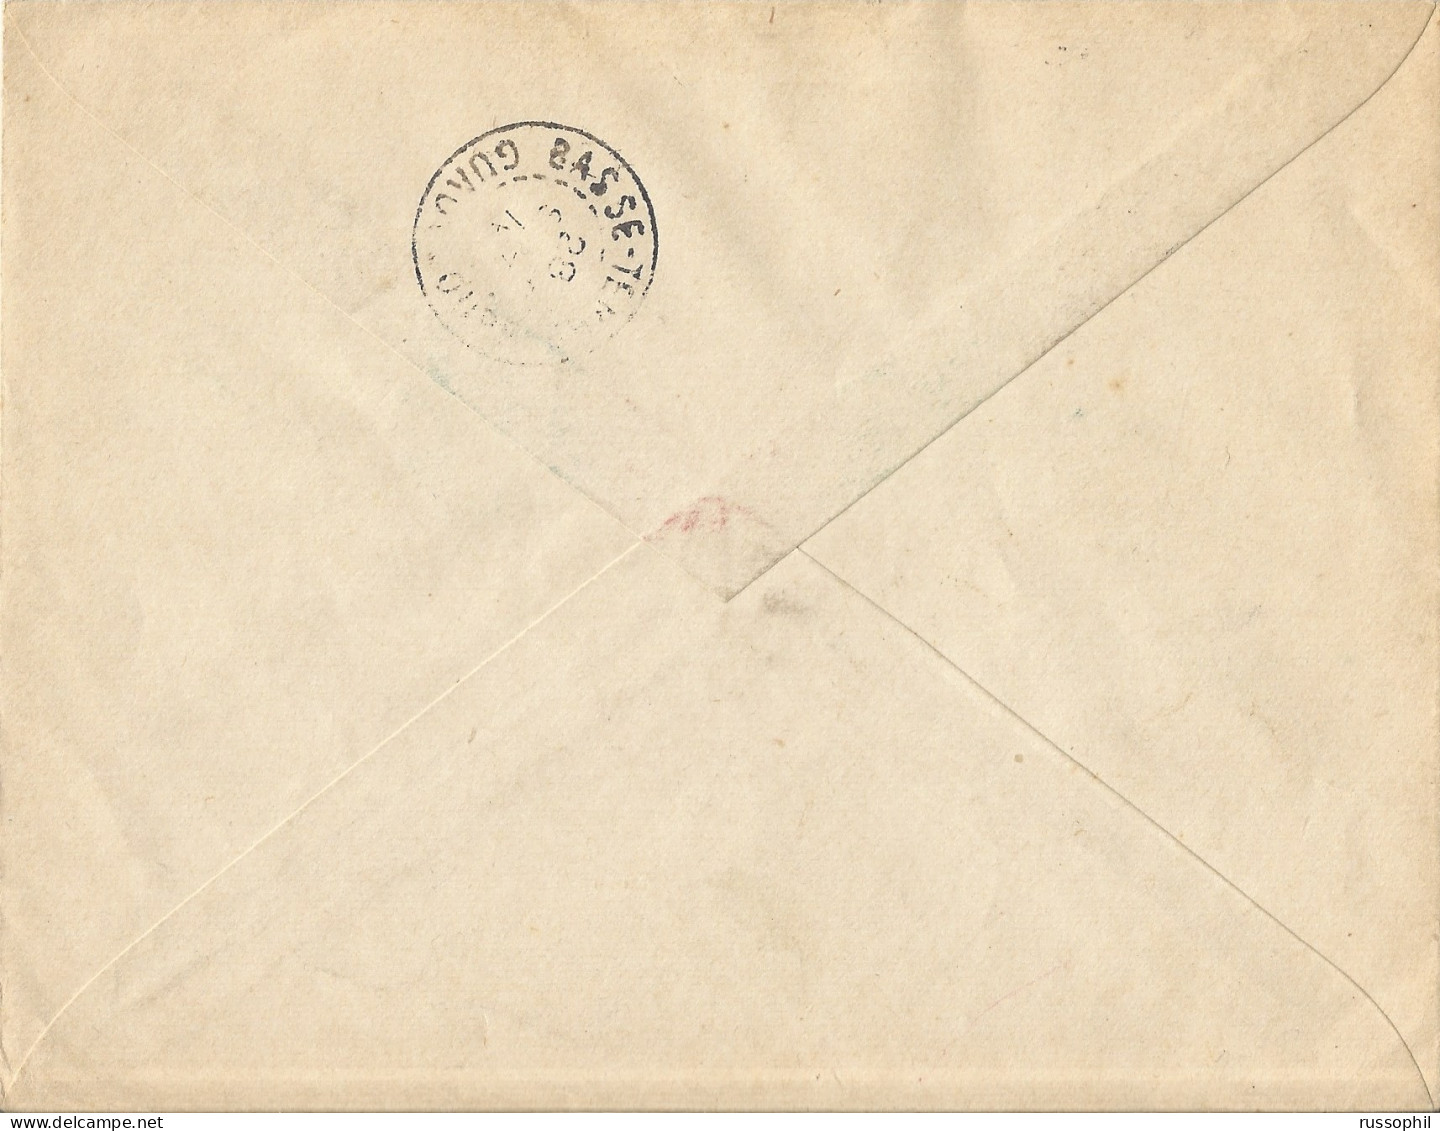 GUADELOUPE - FDC - 3 FR. 30 CENT. 5 STAMP FRANKING ON COVER FROM POINTE A PITRE TO BASSE TERRE - 27 SEPT 1943 - Cartas & Documentos